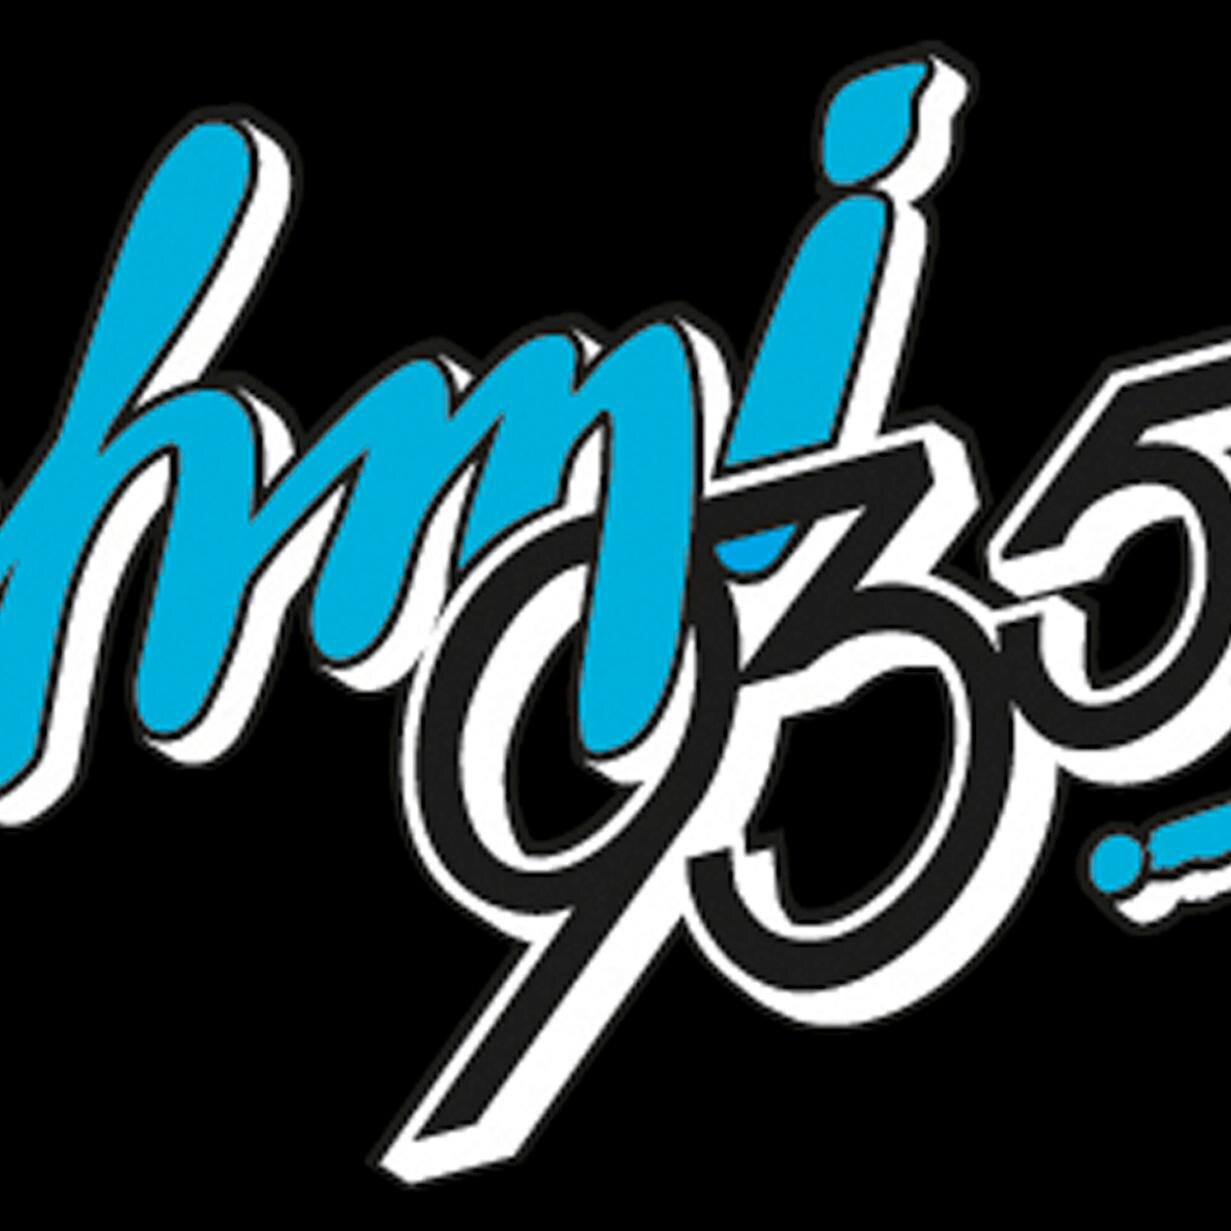 News, weather, traffic, sports, school closings, community events, and the best classic hits are on WHMI, Livingston County's Own 93-5!